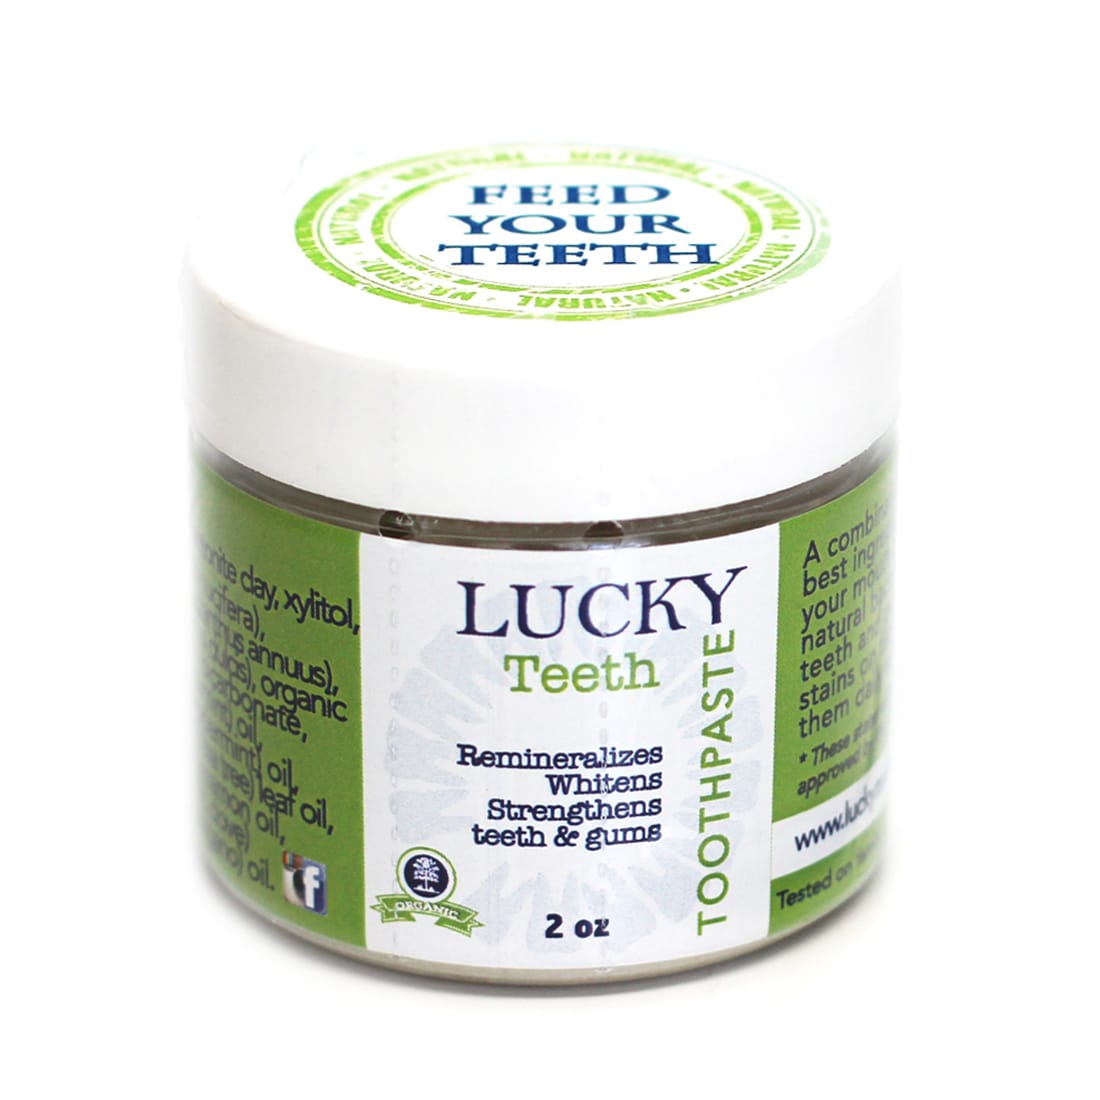 flower-of-life-lucky-teeth-remineralizing-toothpaste-jar-front